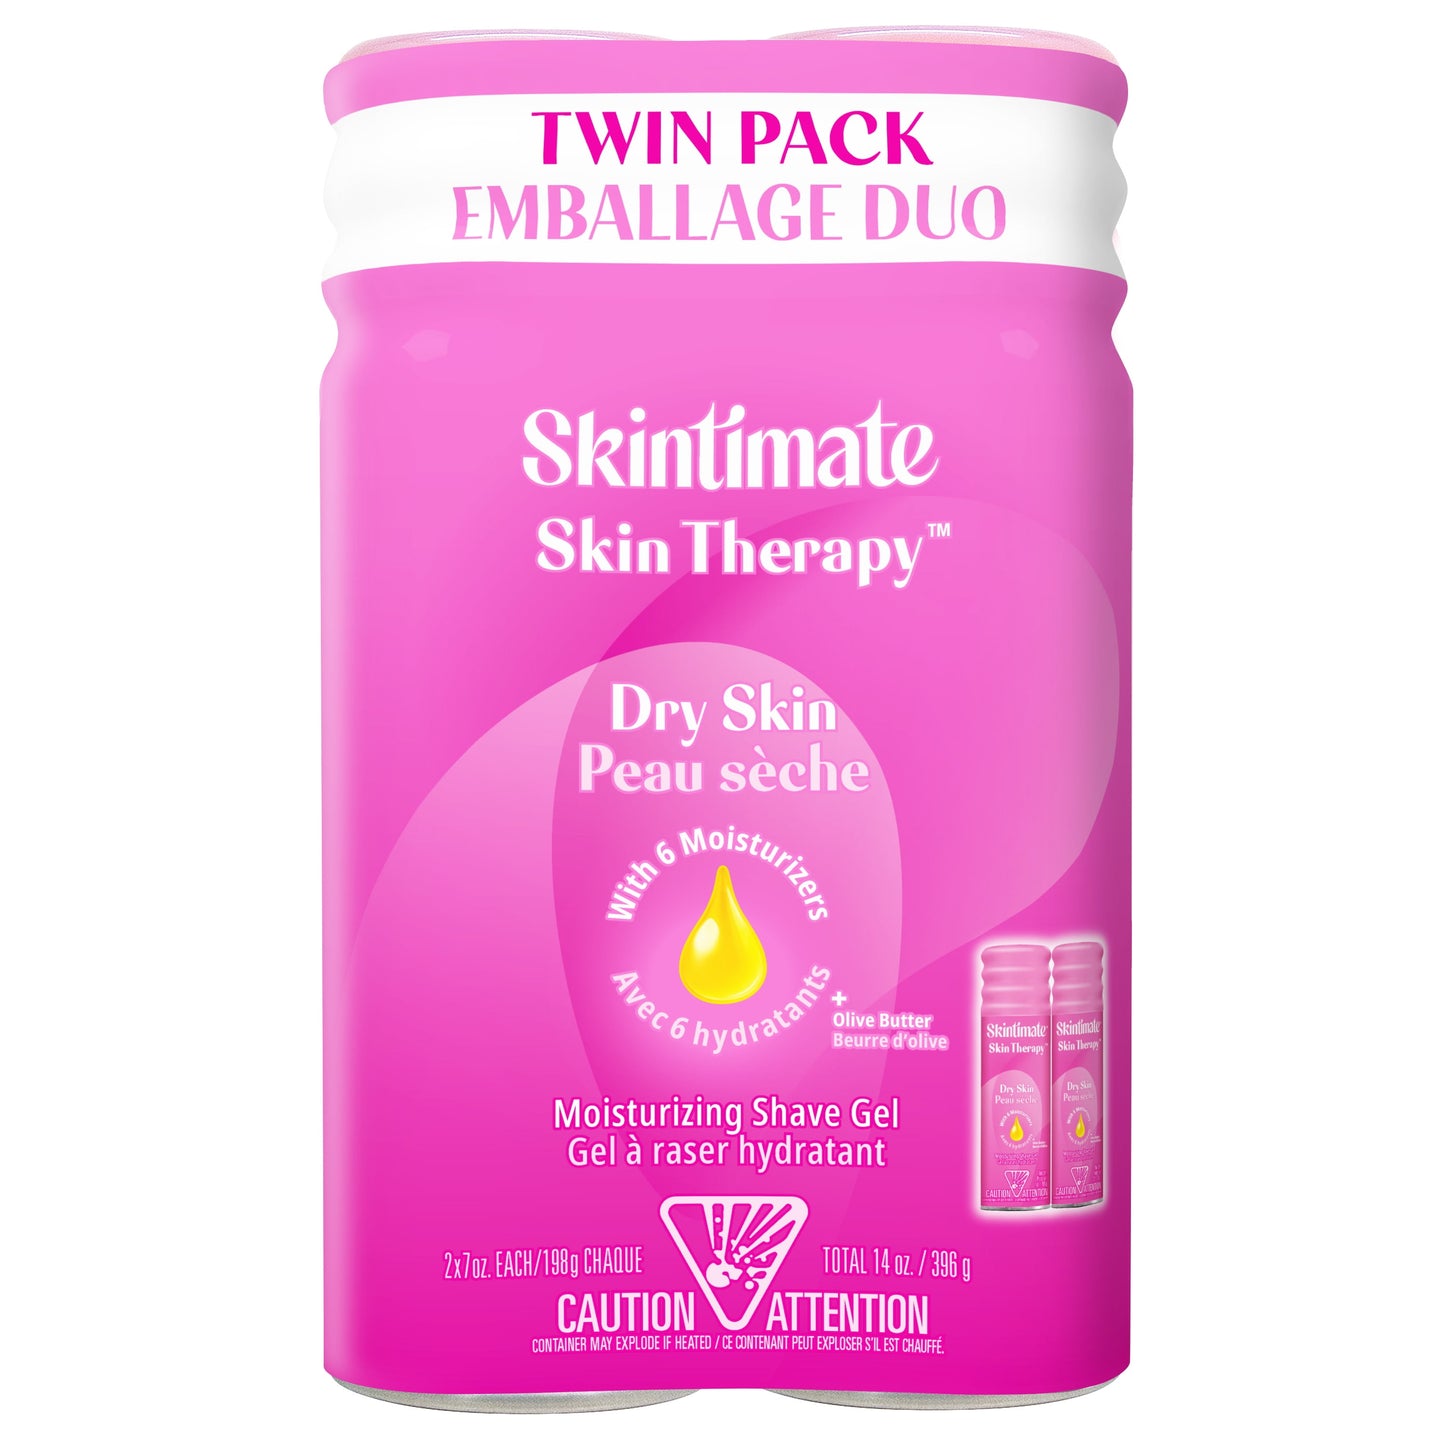 Skintimate Skin Therapy Dry Skin Women's Shave Gel Twin Pack, 14 oz